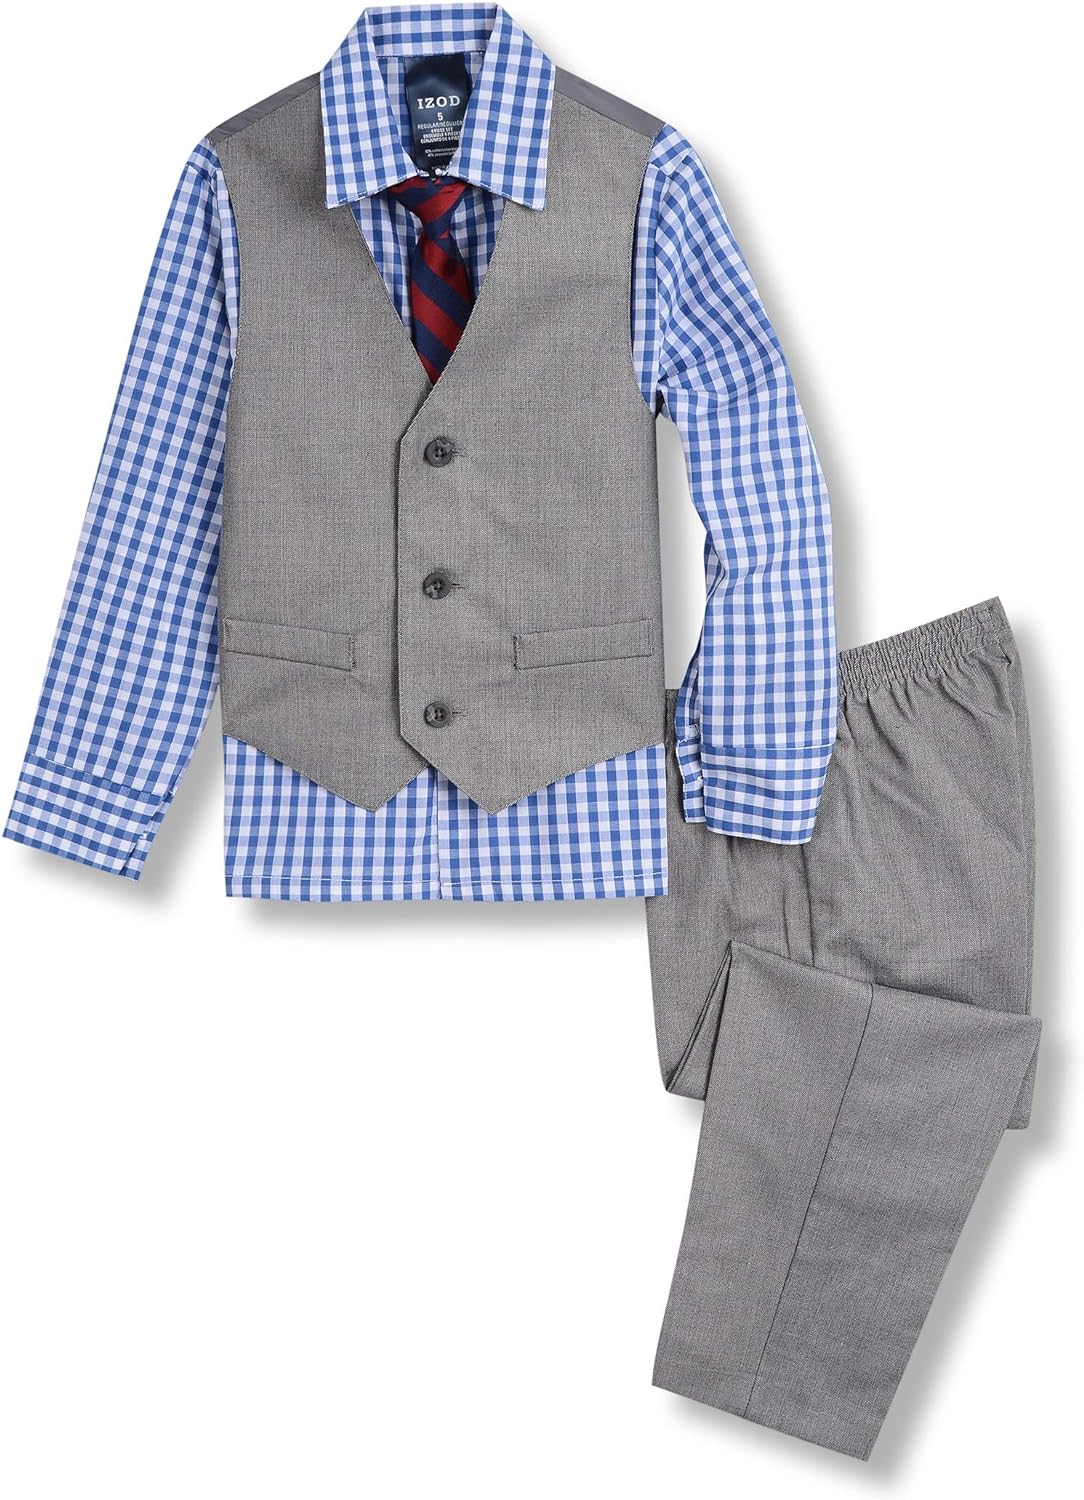 IZOD Boys' 4-Piece Set with Collared Dress Shirt, Tie, Vest, and Pants